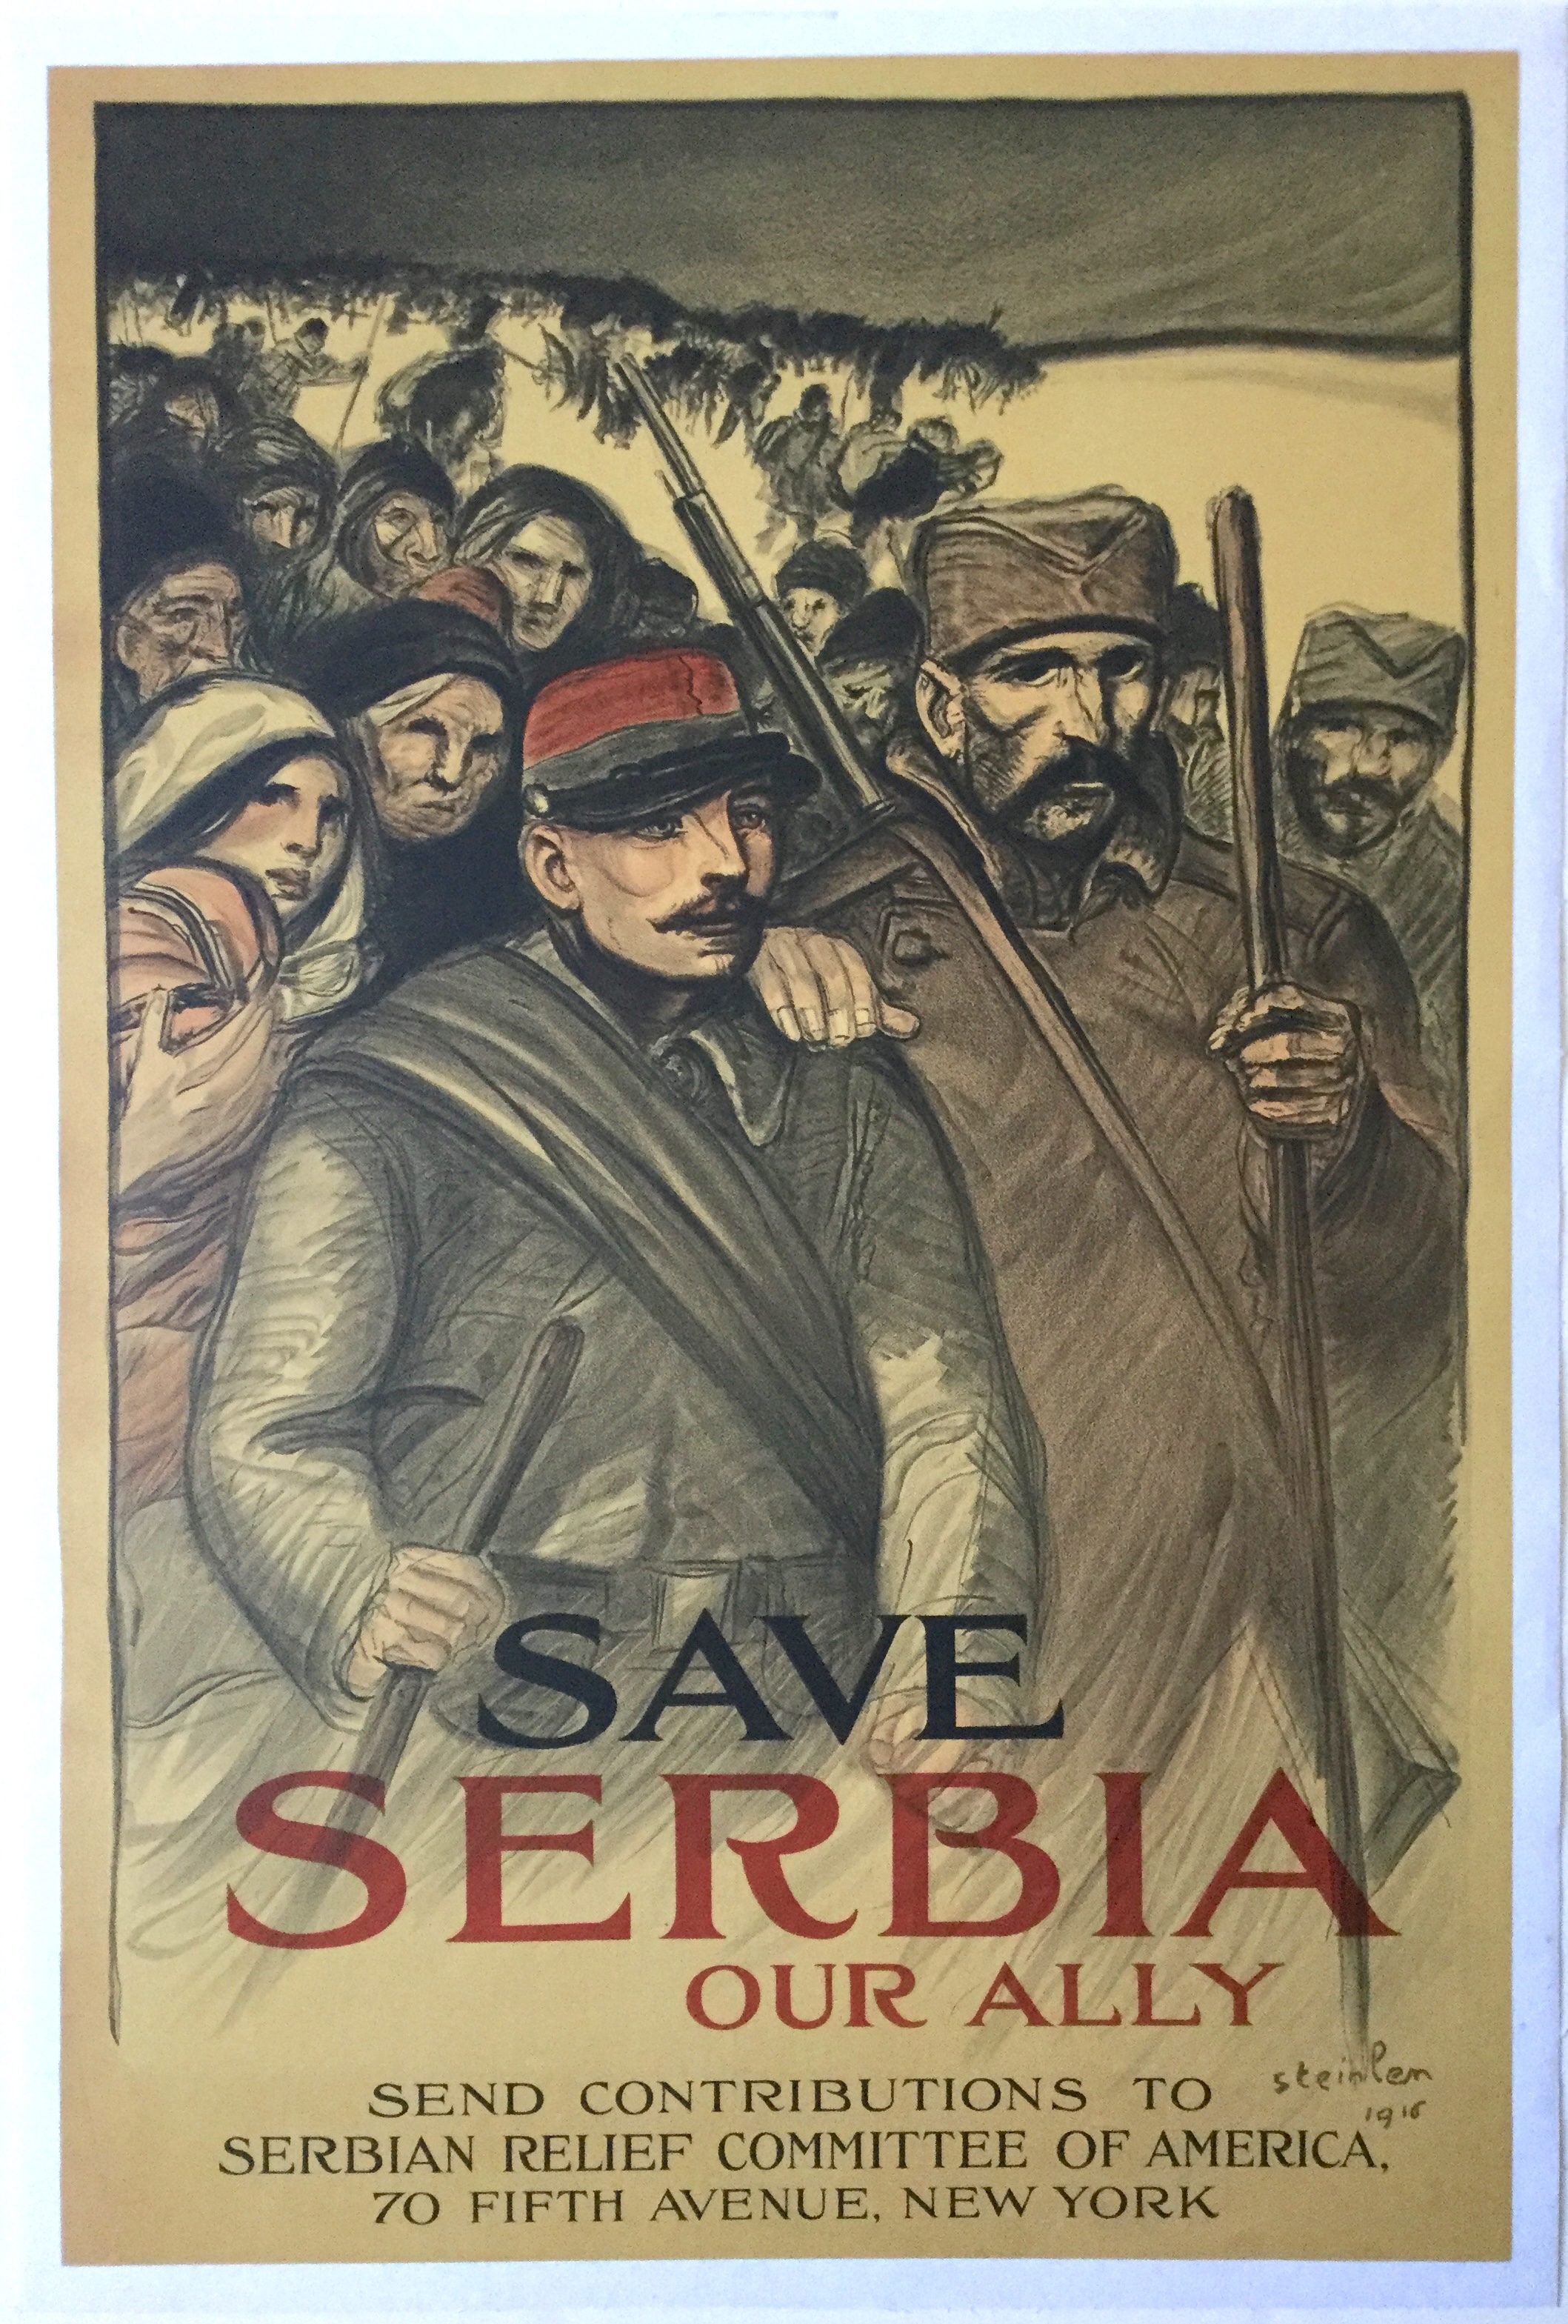 L2273	SAVE SERBIA - OUR ALLY